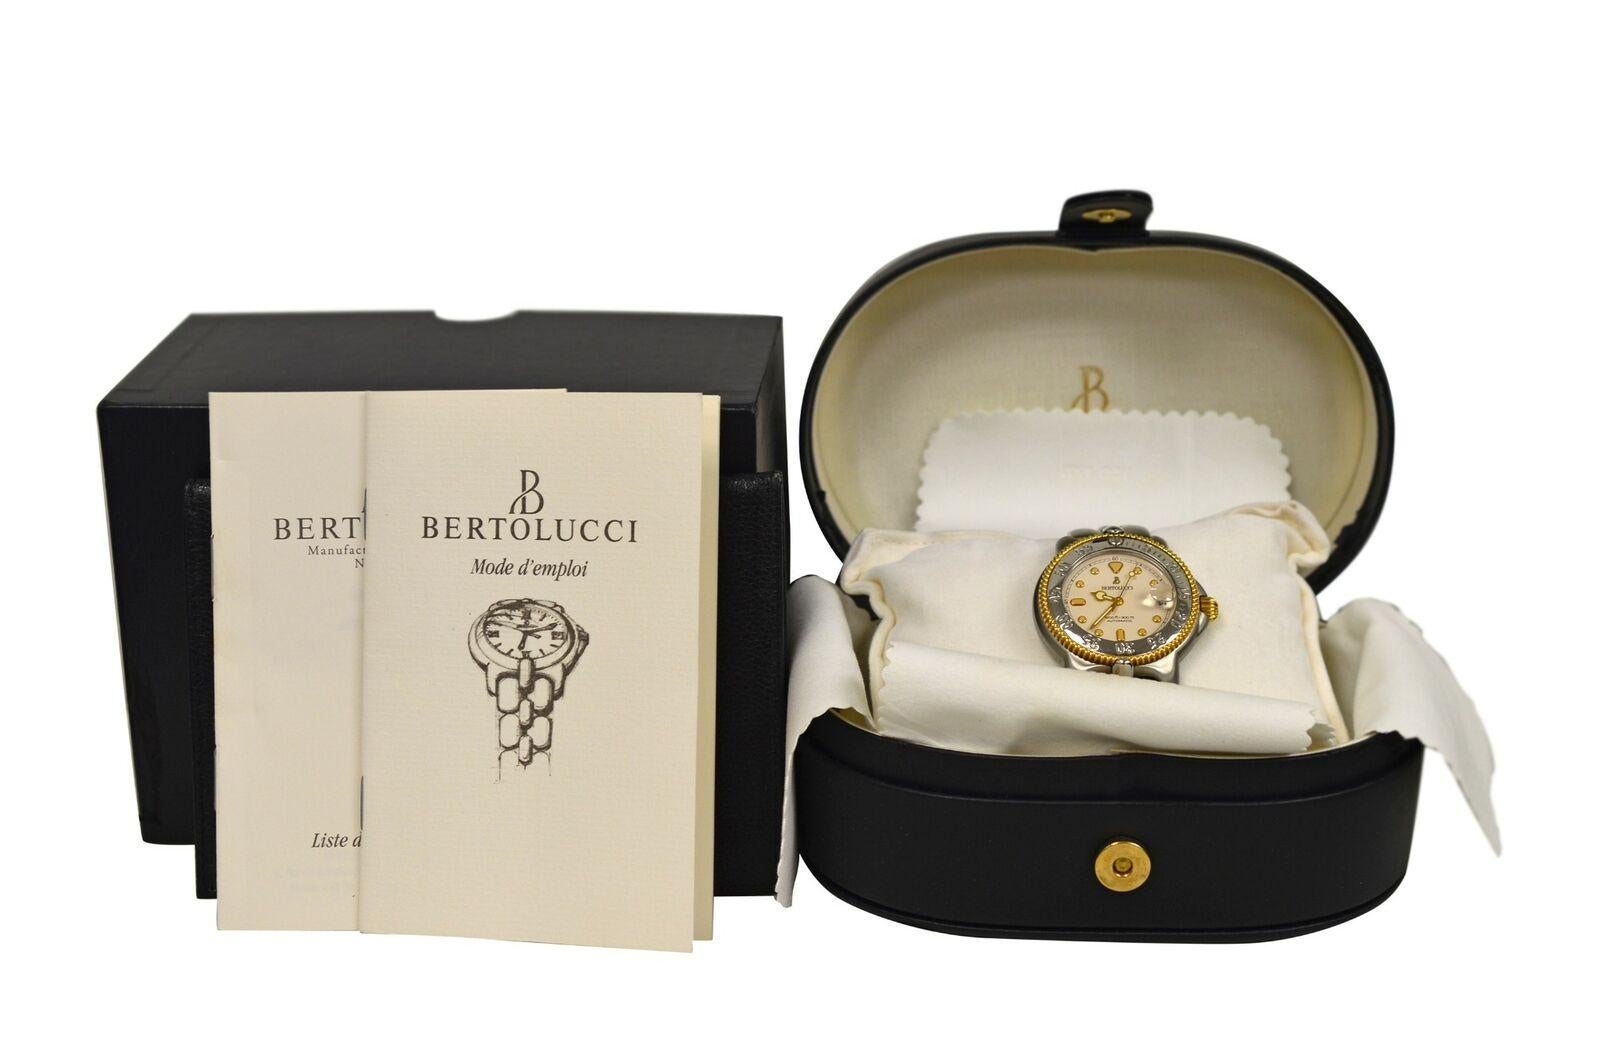 
Brand	Bertolucci
Model	Pulchra Maris Diver 629 8055 49
Gender	unisex
Condition	New store display
Movement	Automatic
Case Material	Stainless Steel & Gold
Bracelet / Strap Material	Stainless Steel
Clasp / Buckle Material	Stainless Steel
Clasp